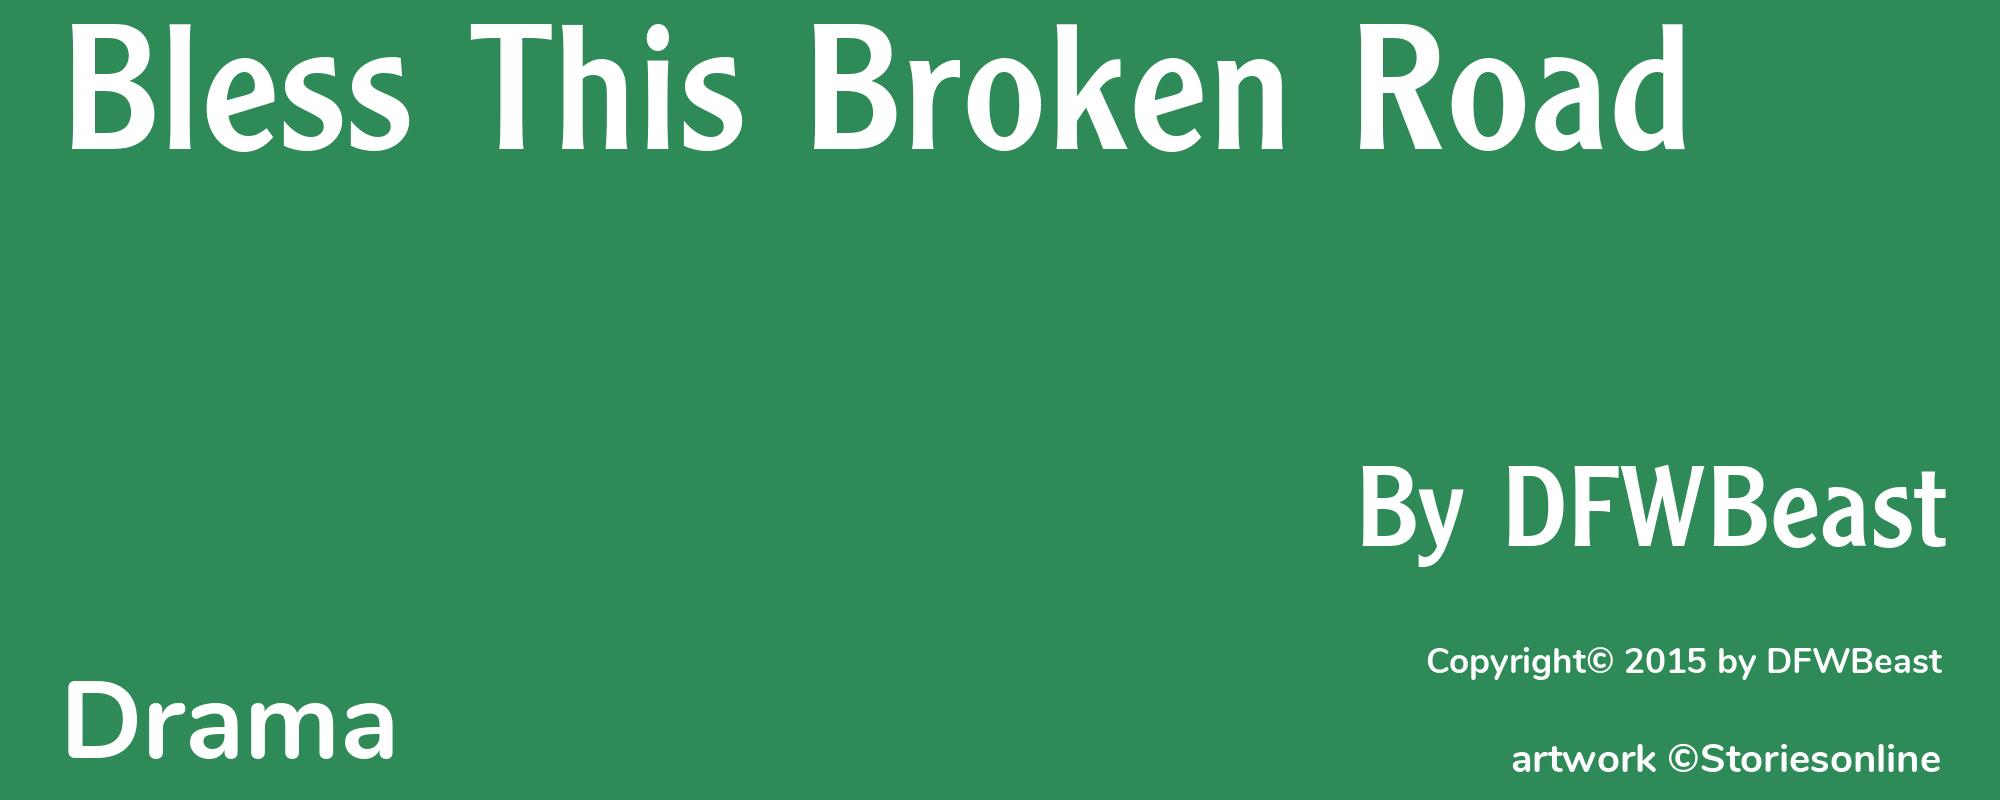 Bless This Broken Road - Cover